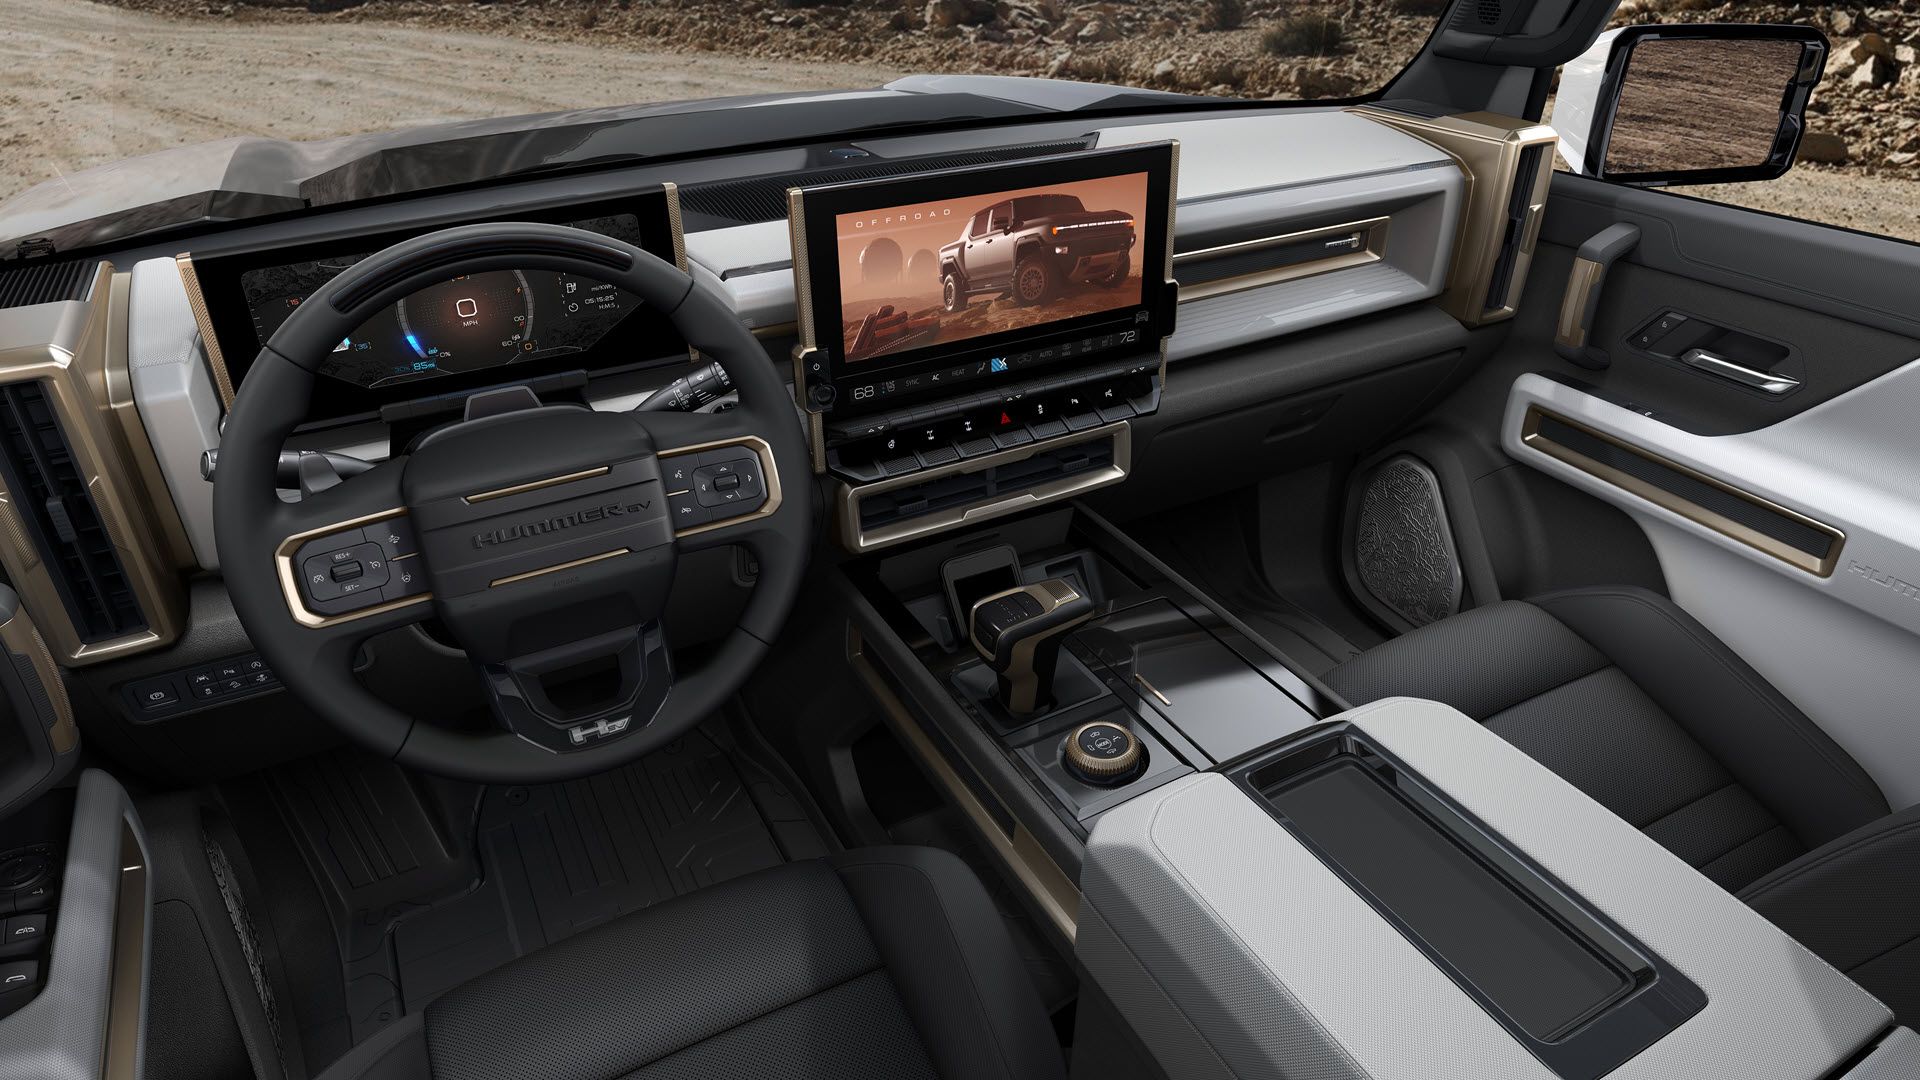 The interior of a HUmmer EV, with a large horizontal touchscreen.